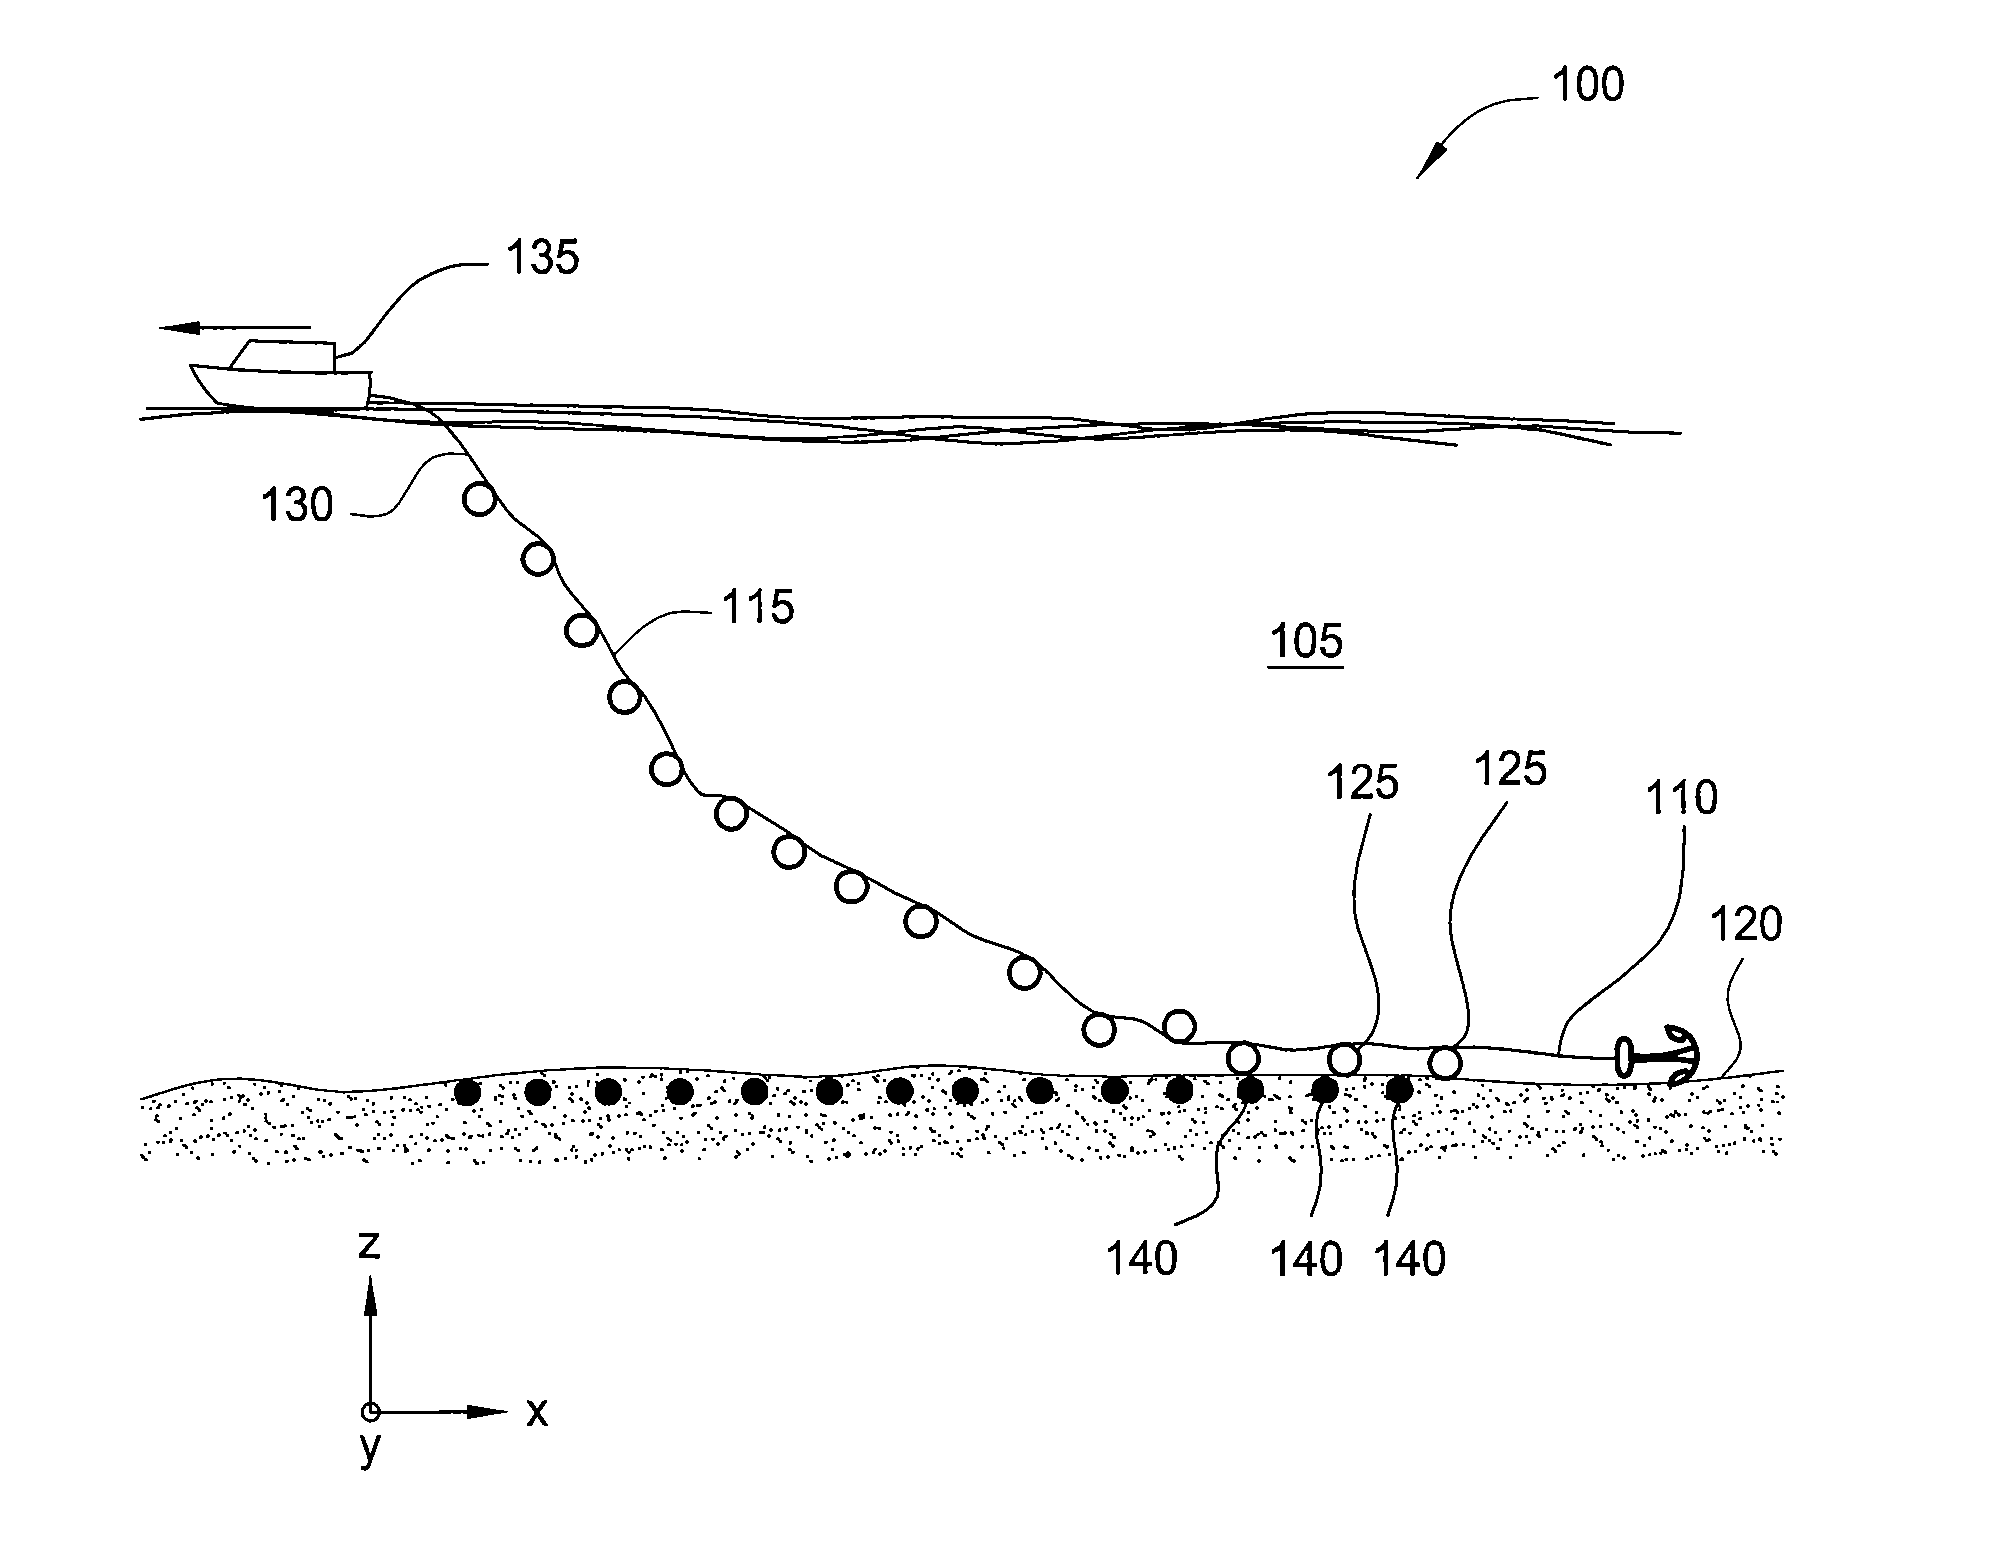 Method and apparatus for accurate placement of ocean bottom seismic instrumentation